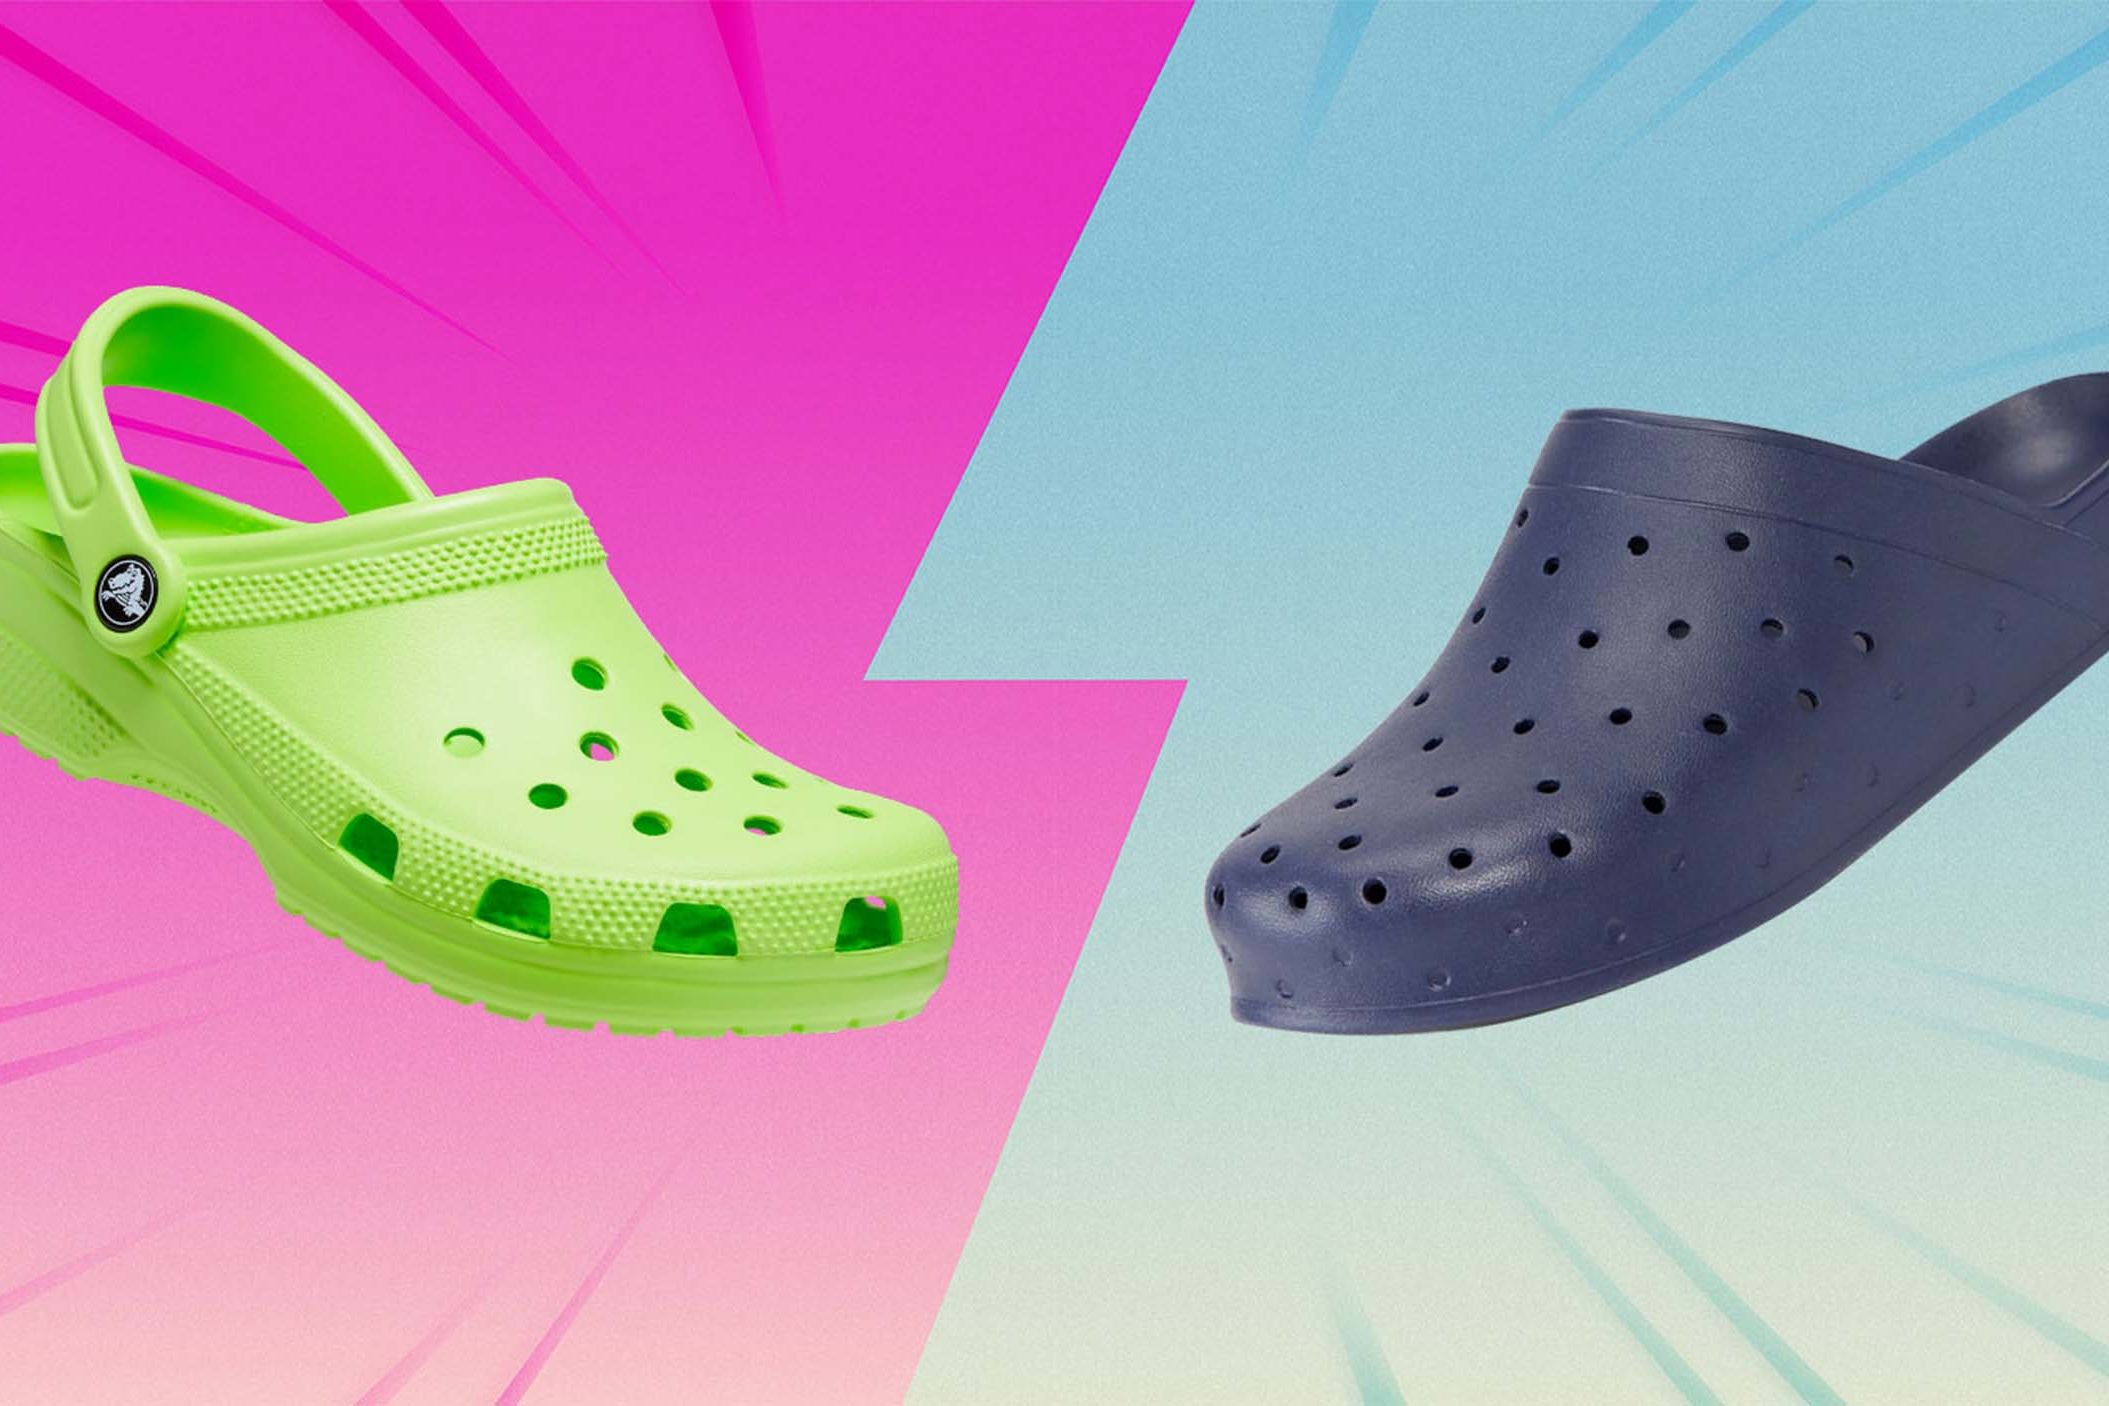 Crocs vs Old Navy clogs: We put these shoes to the test | CNN Underscored